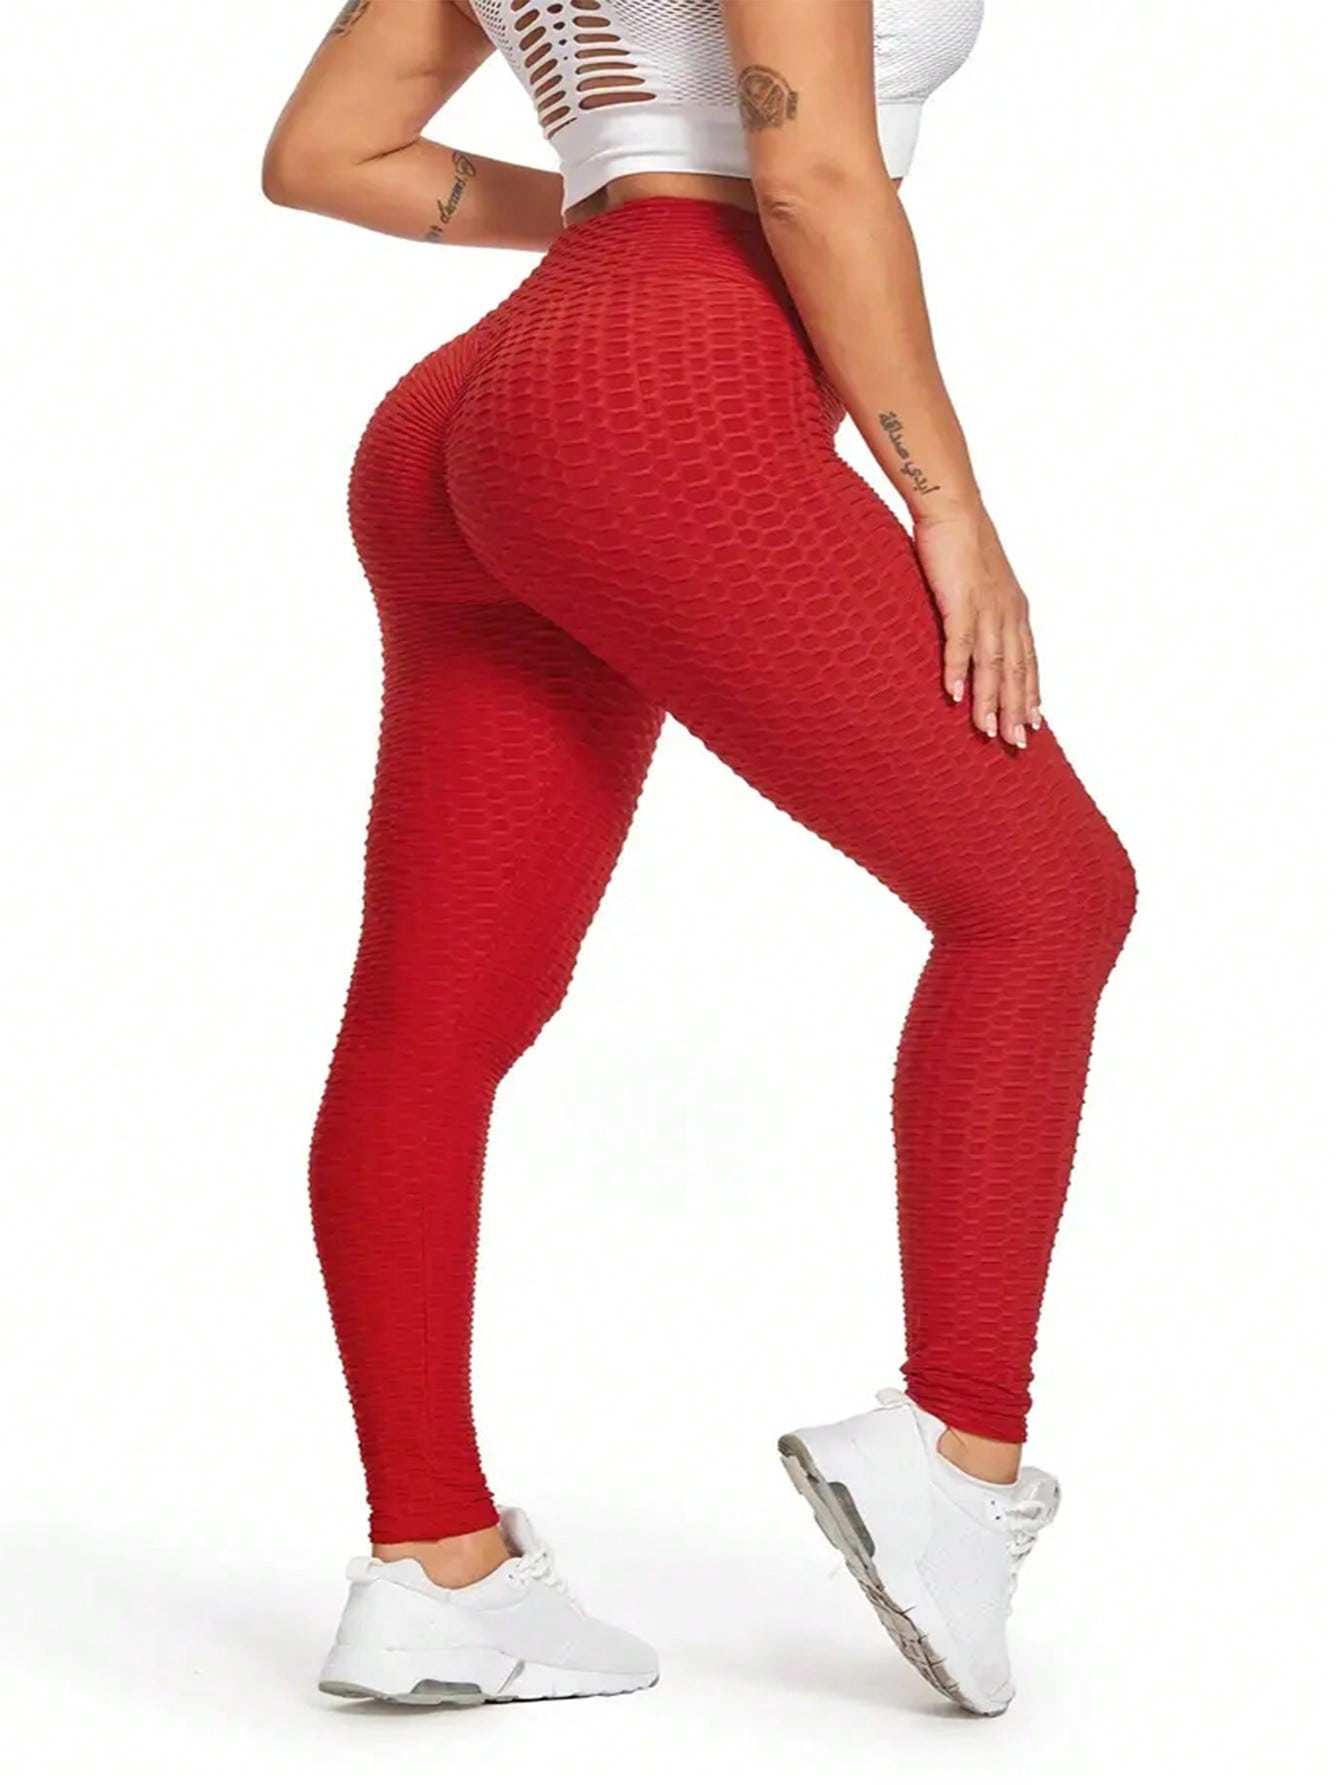 Plus Size Tummy Control Leggings: Enhance Your Silhouette with Style and Comfort